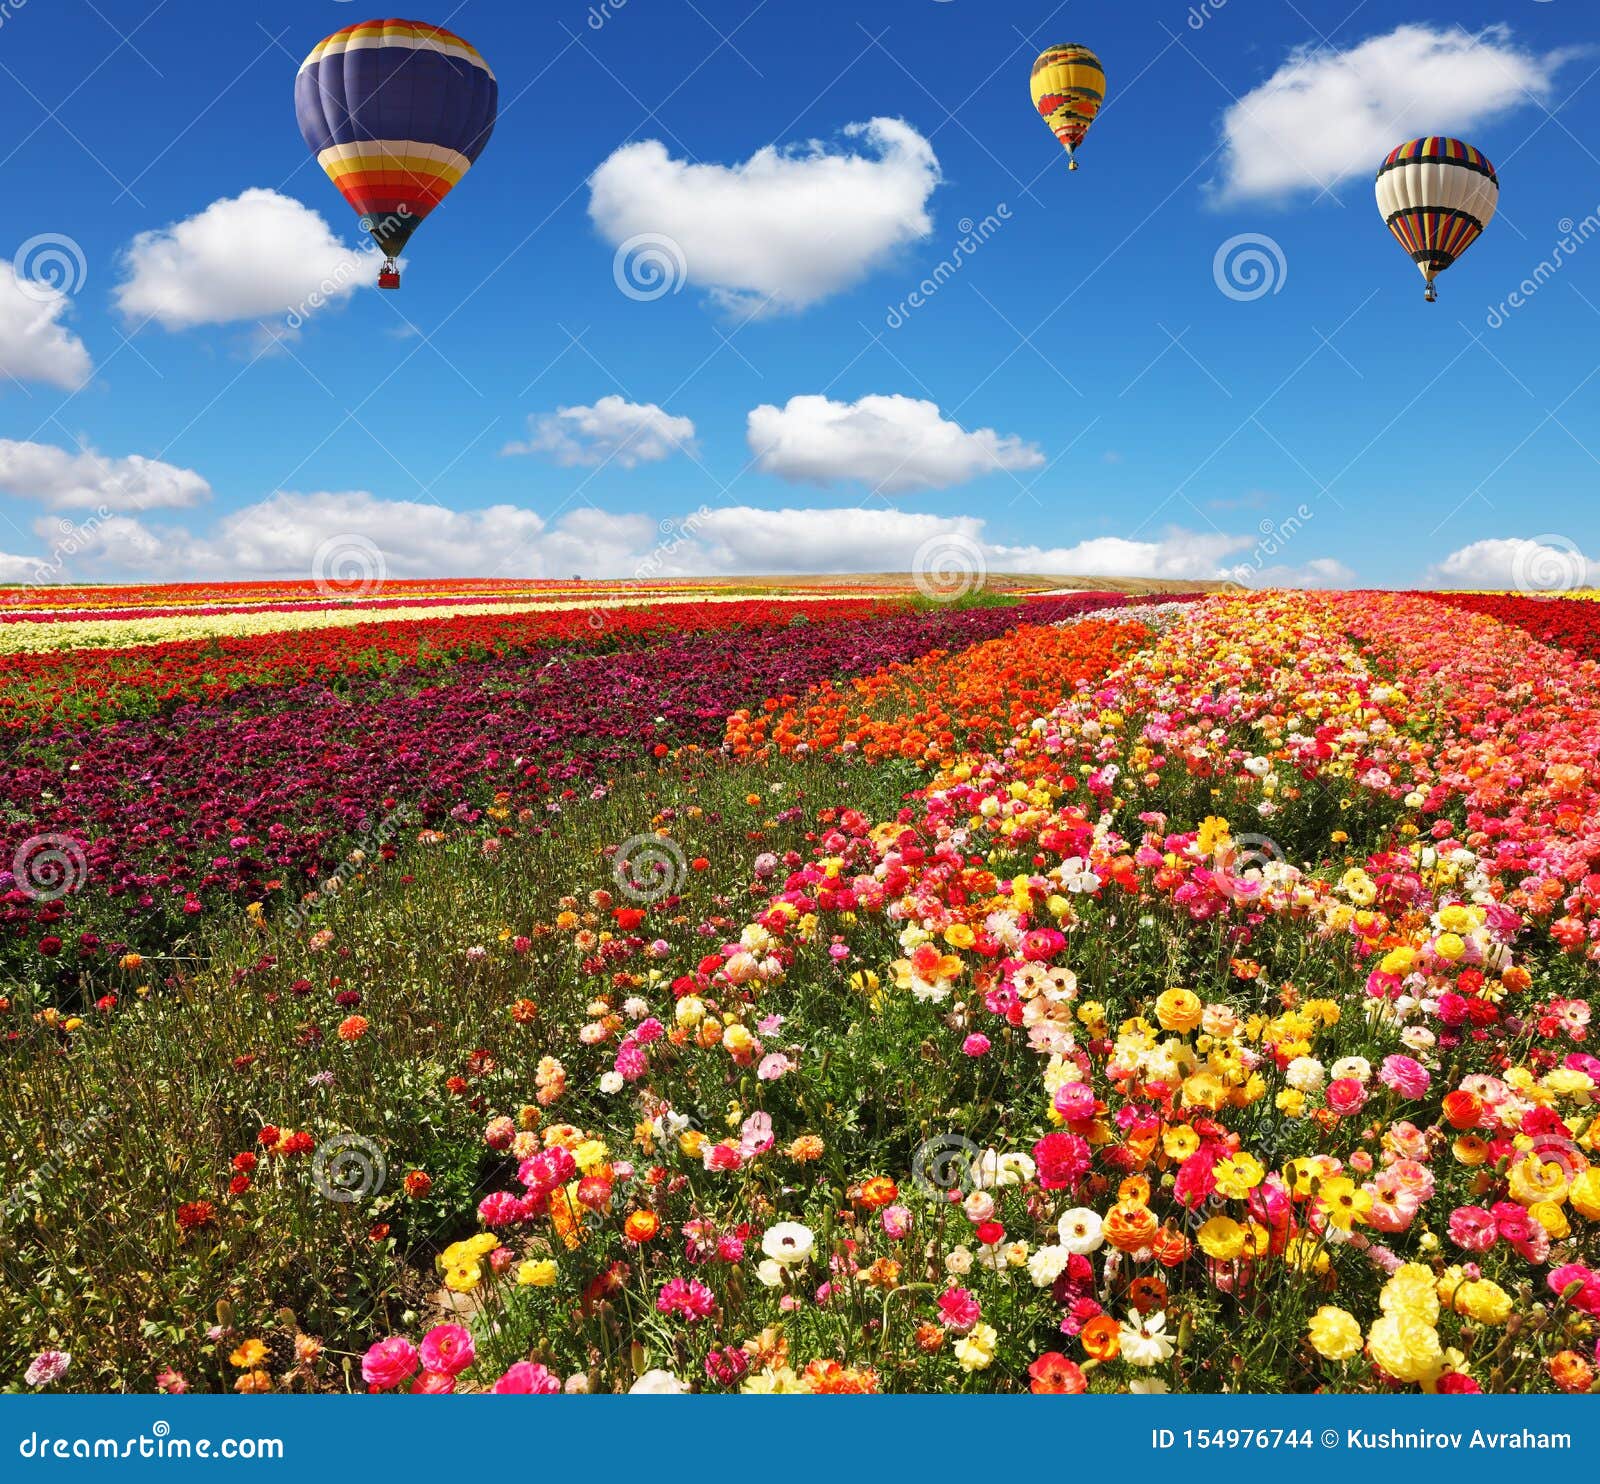 Three Balloons Flying Over Floral Field Stock Photo - Image of season ...